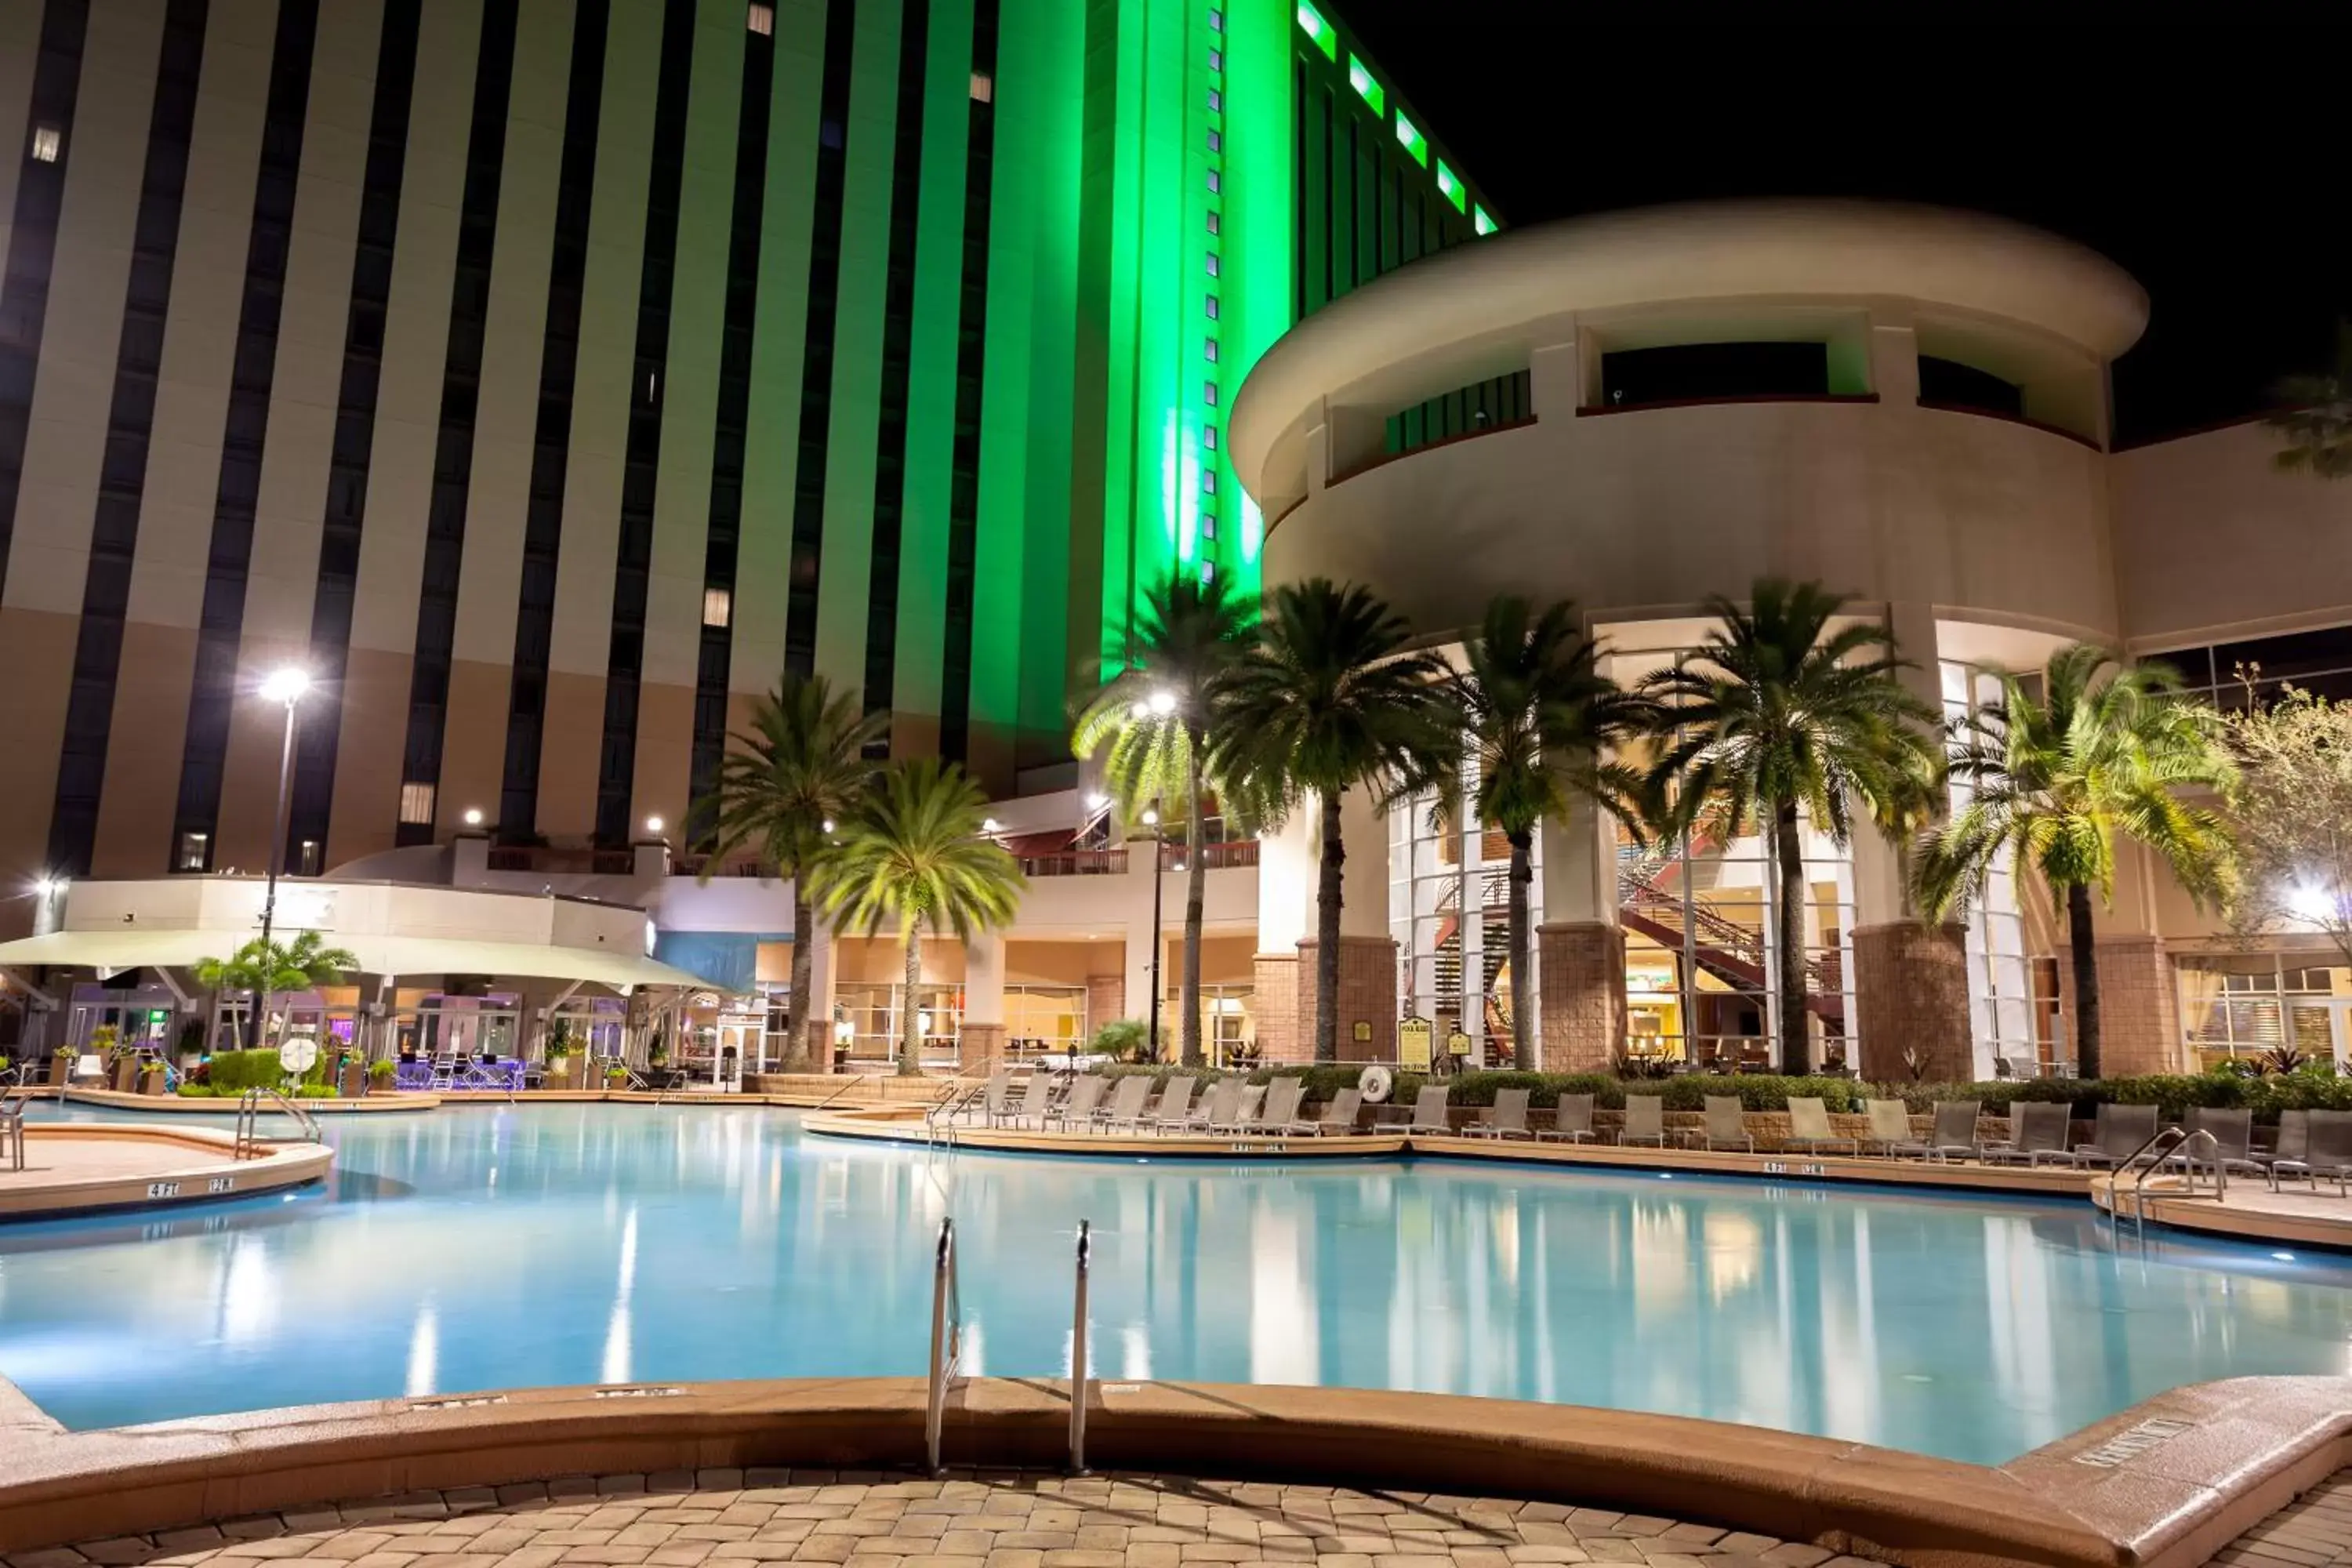 Property building, Swimming Pool in Rosen Centre Hotel Orlando Convention Center